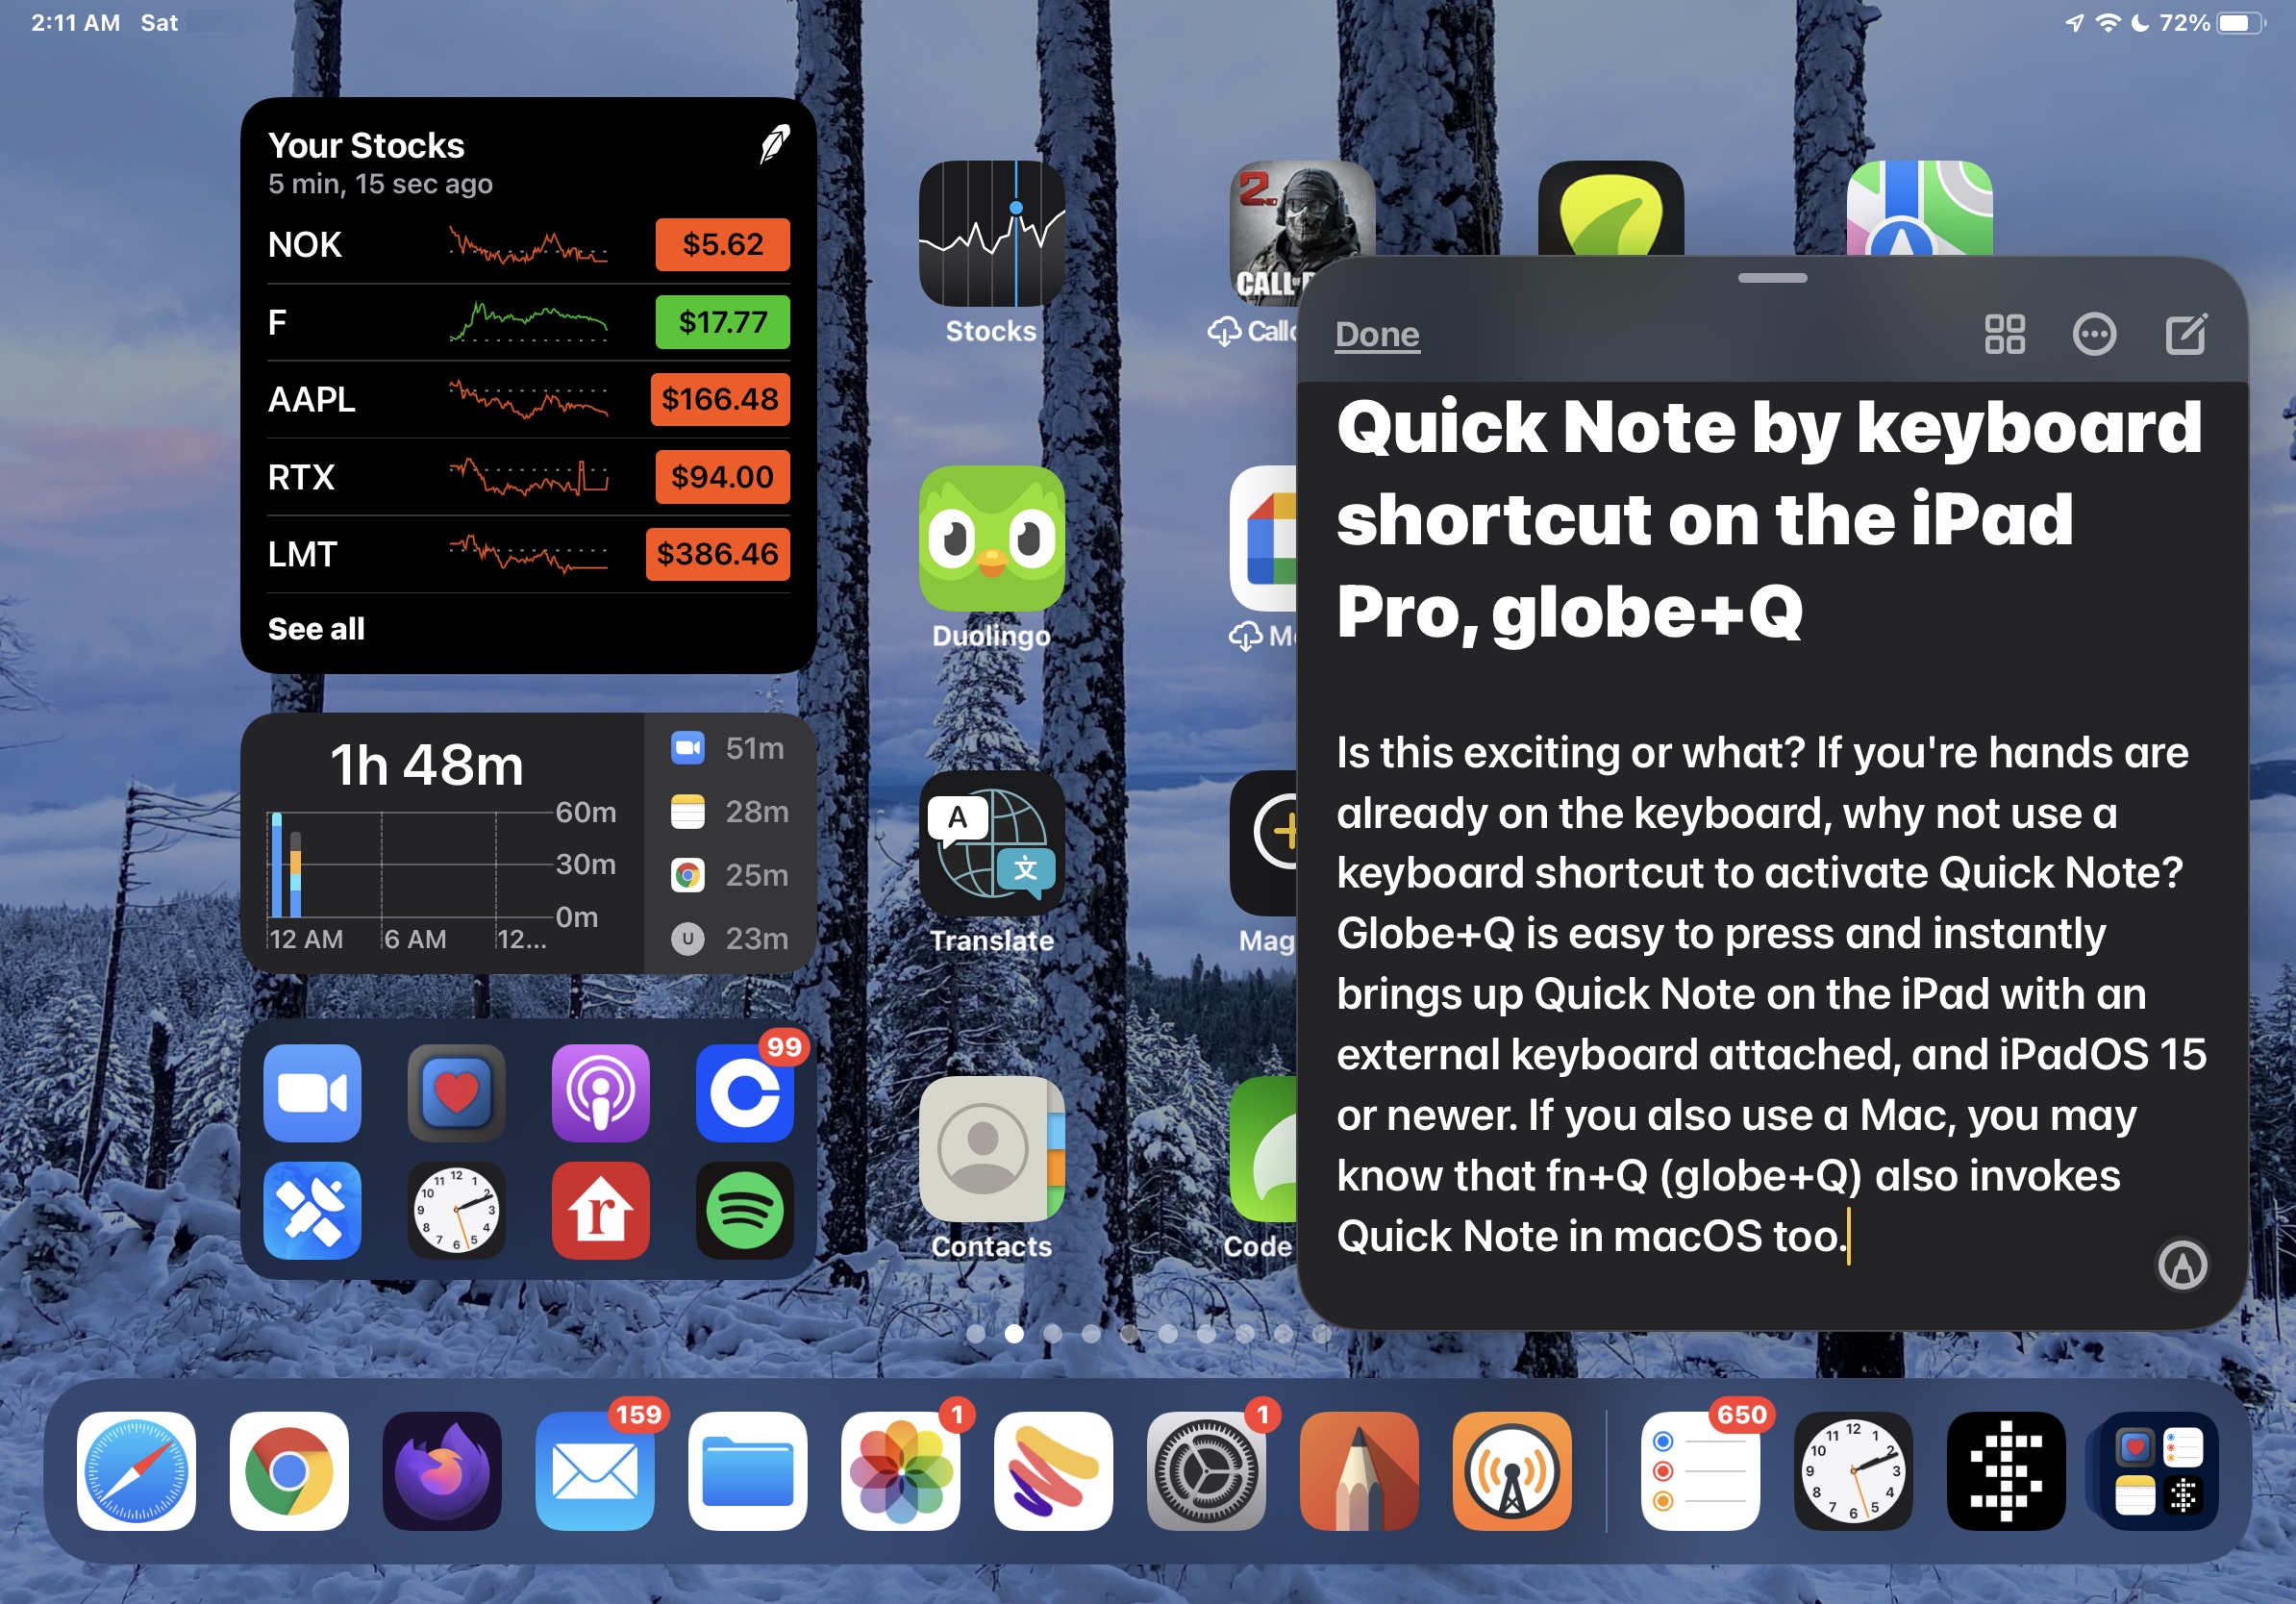 Open Quick Note on iPad with Keyboard Shortcut Globe+Q